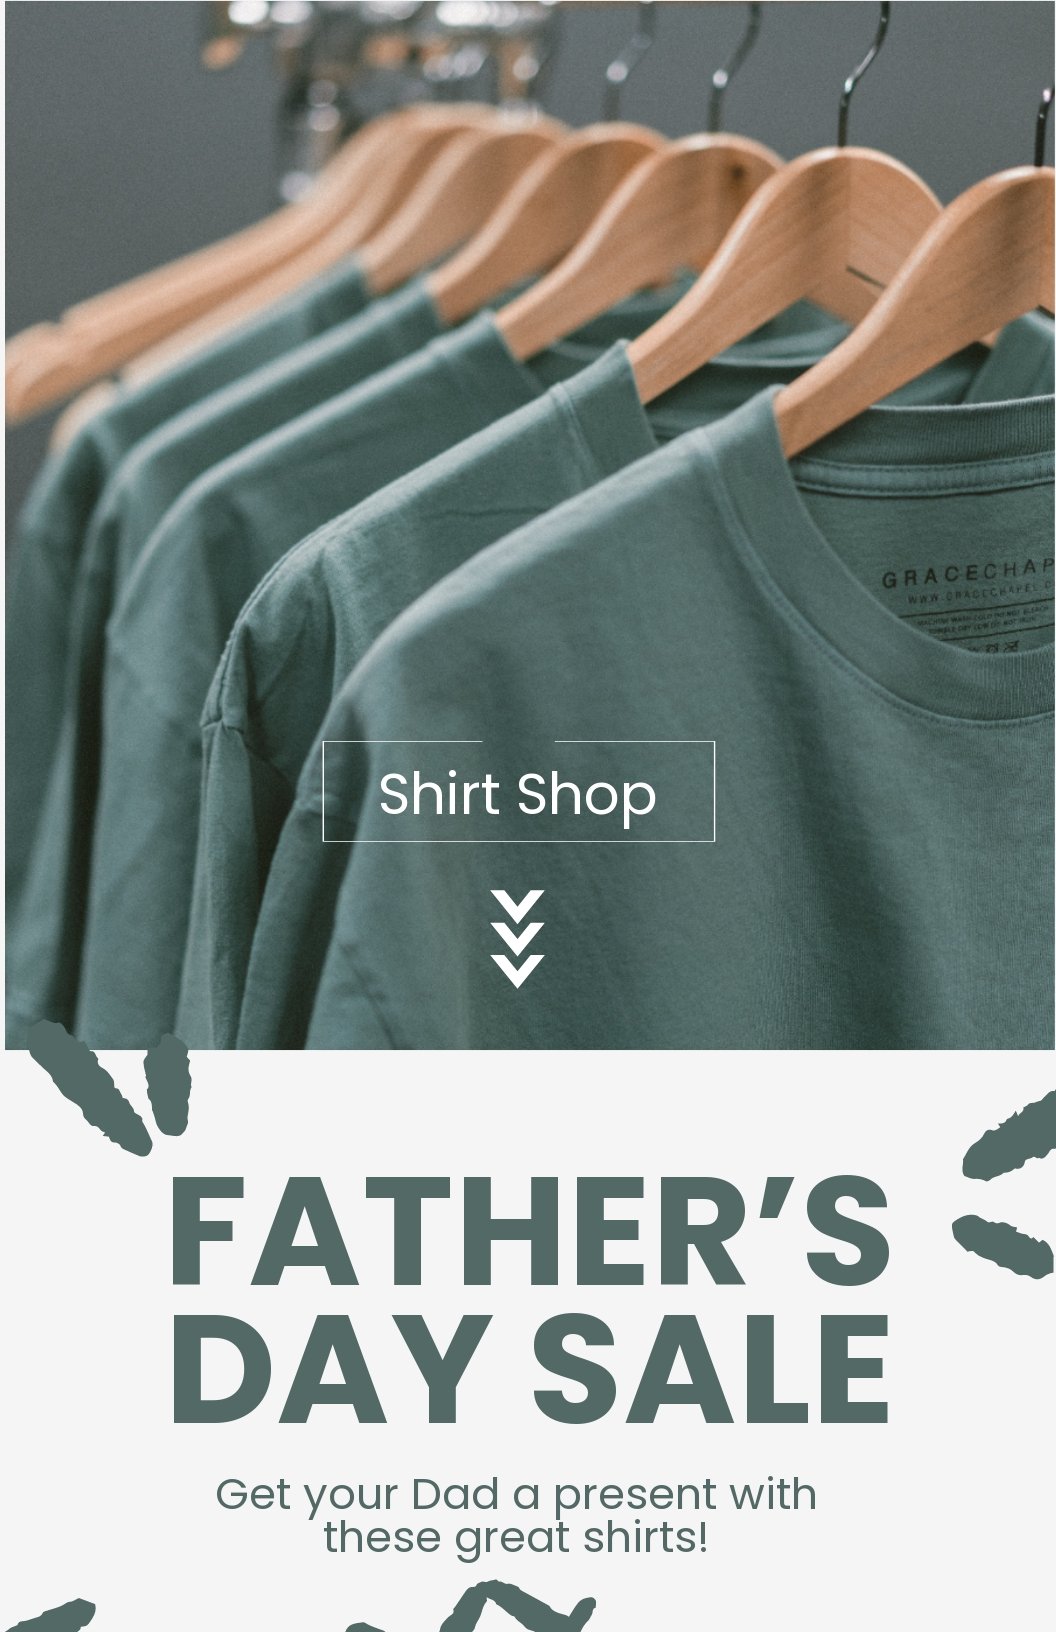 Father's Day Sale Poster Template in Word, Google Docs, Publisher